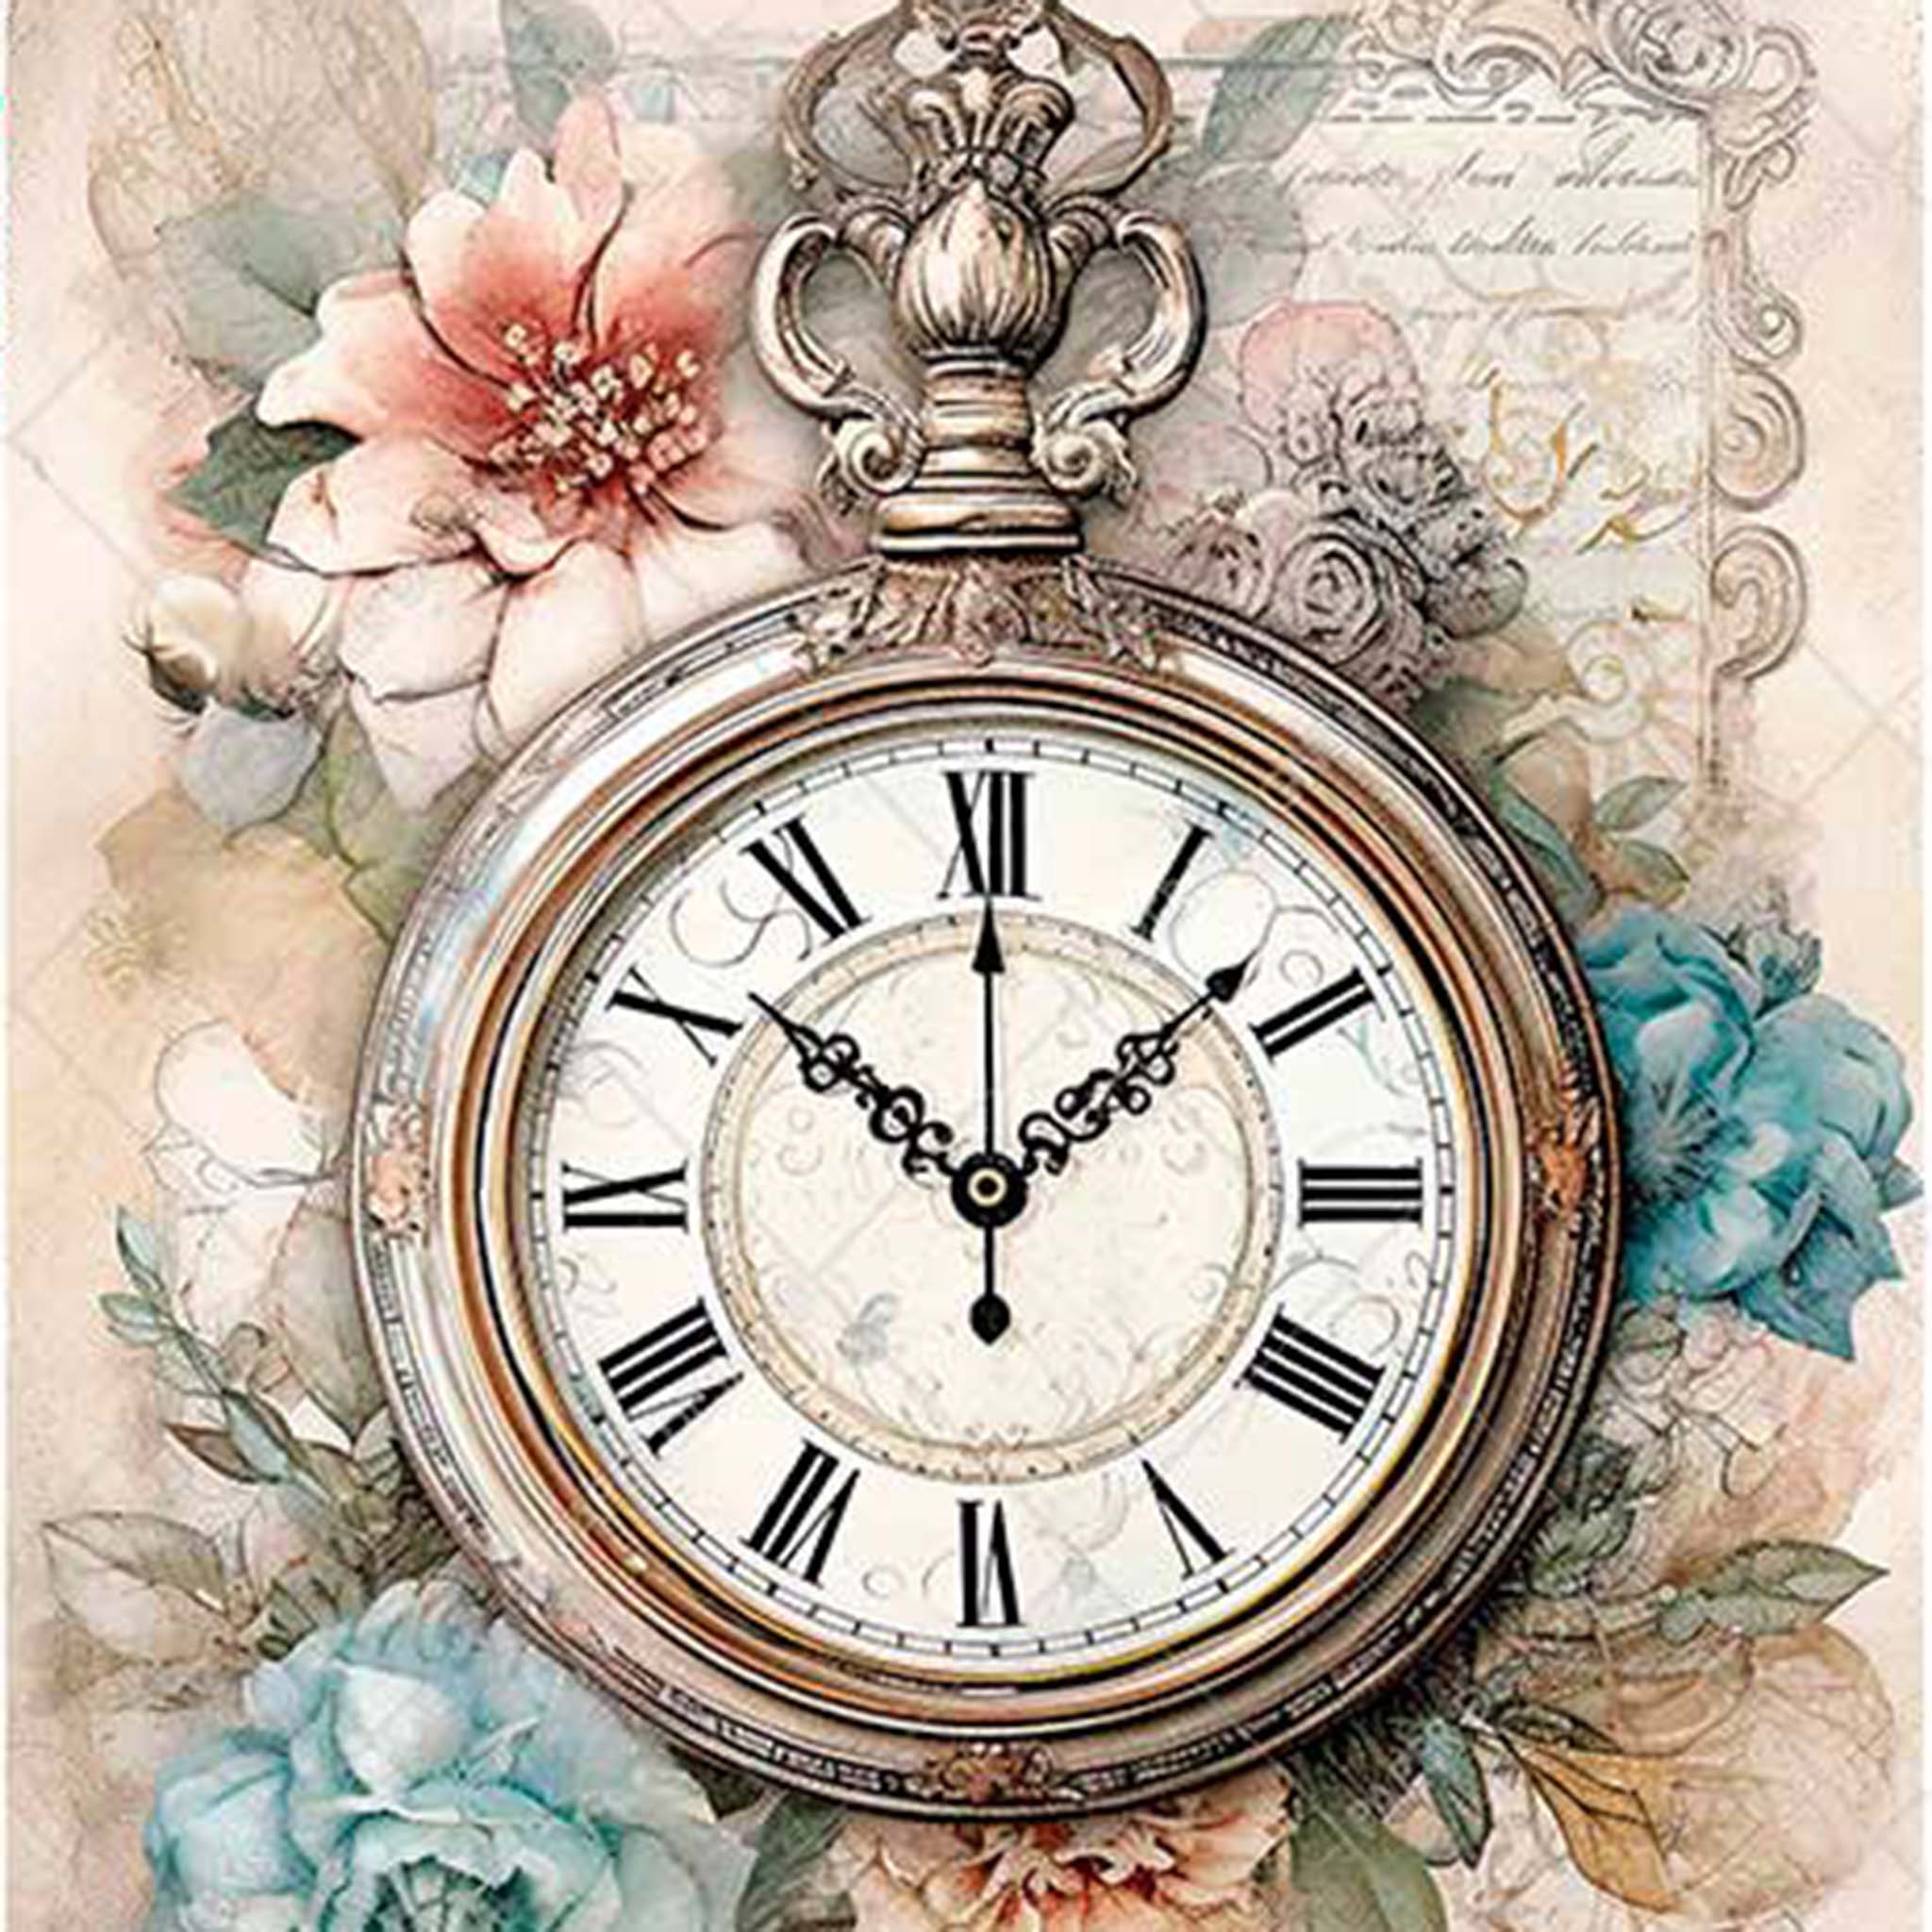 A4 rice paper design featuring a pocket watch nestled in beautiful pink and blue flowers.